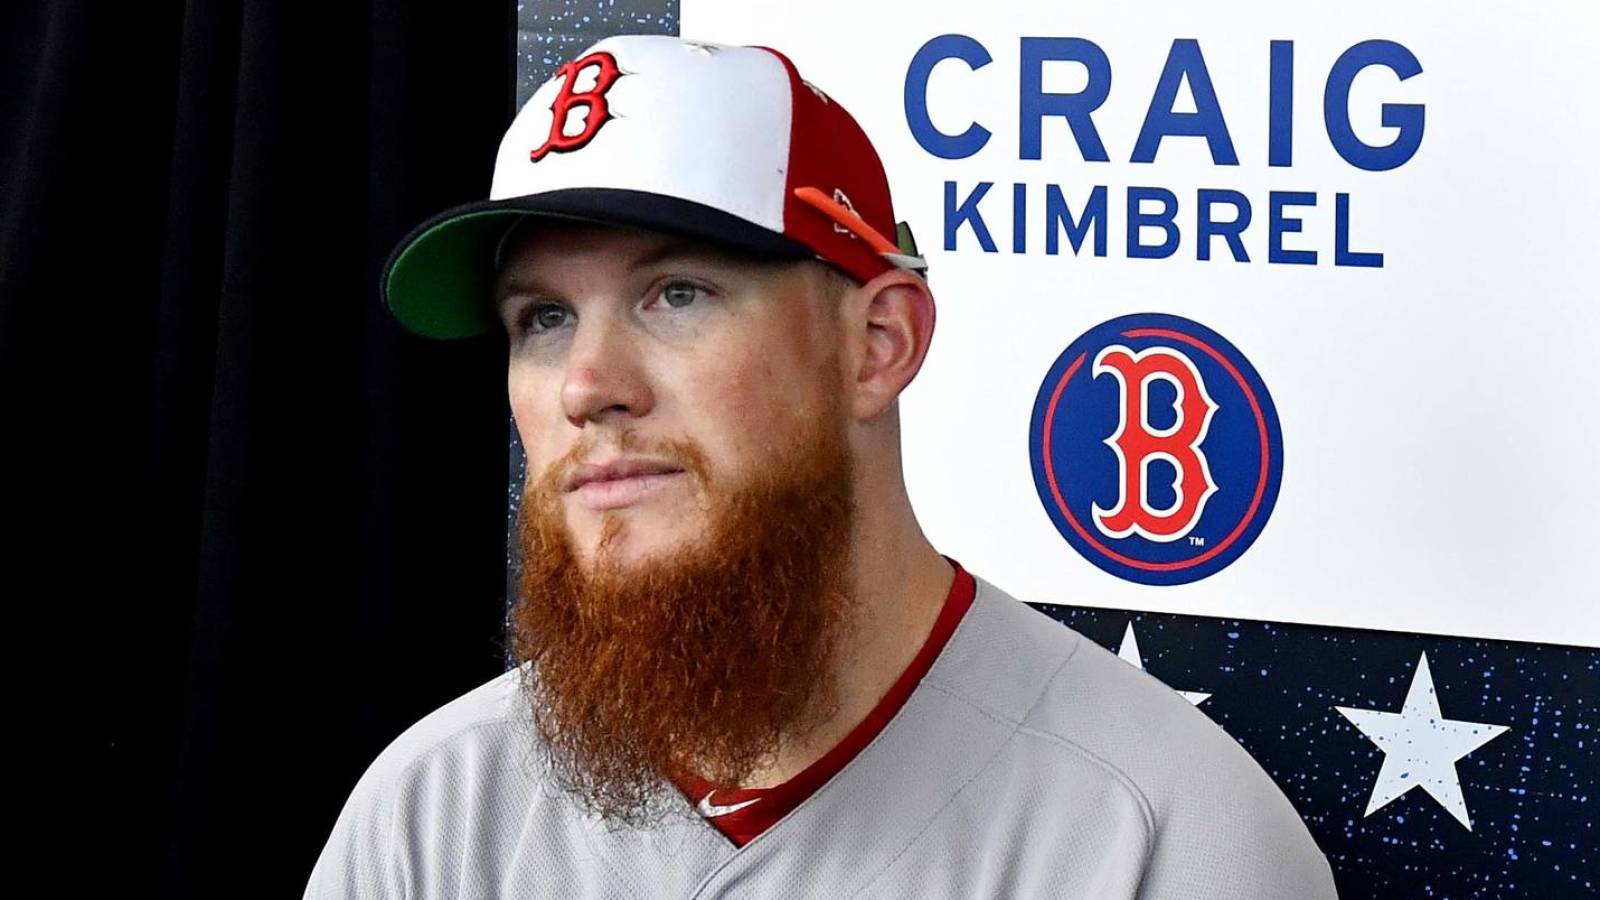 The blame game: Craig Kimbrel's situation is his own making